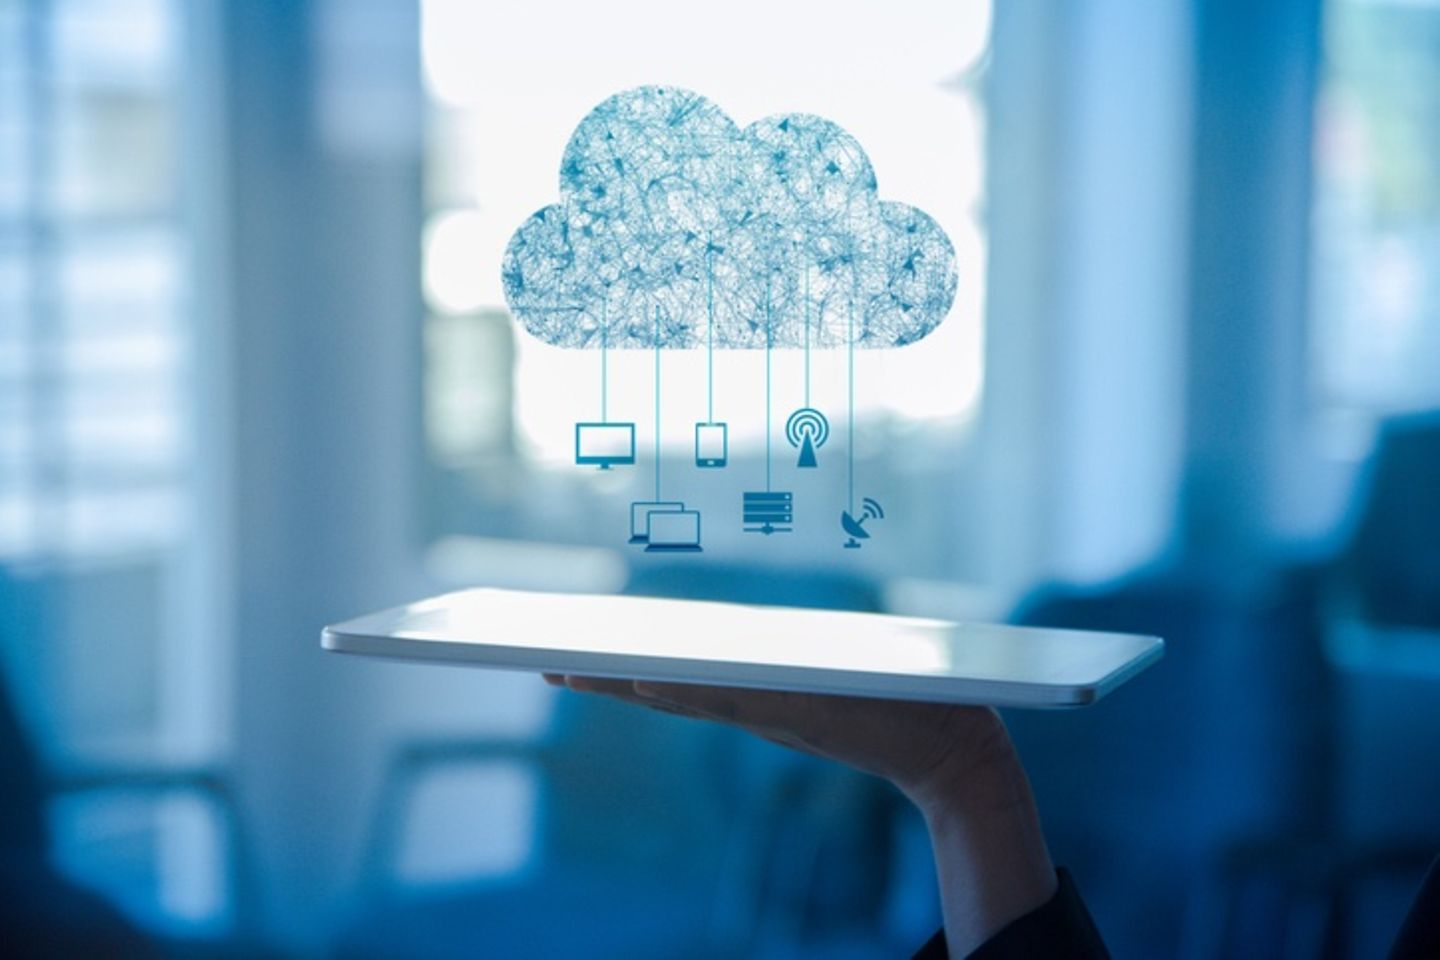 A tablet lies on one hand, above it is a drawing of a cloud and icons.